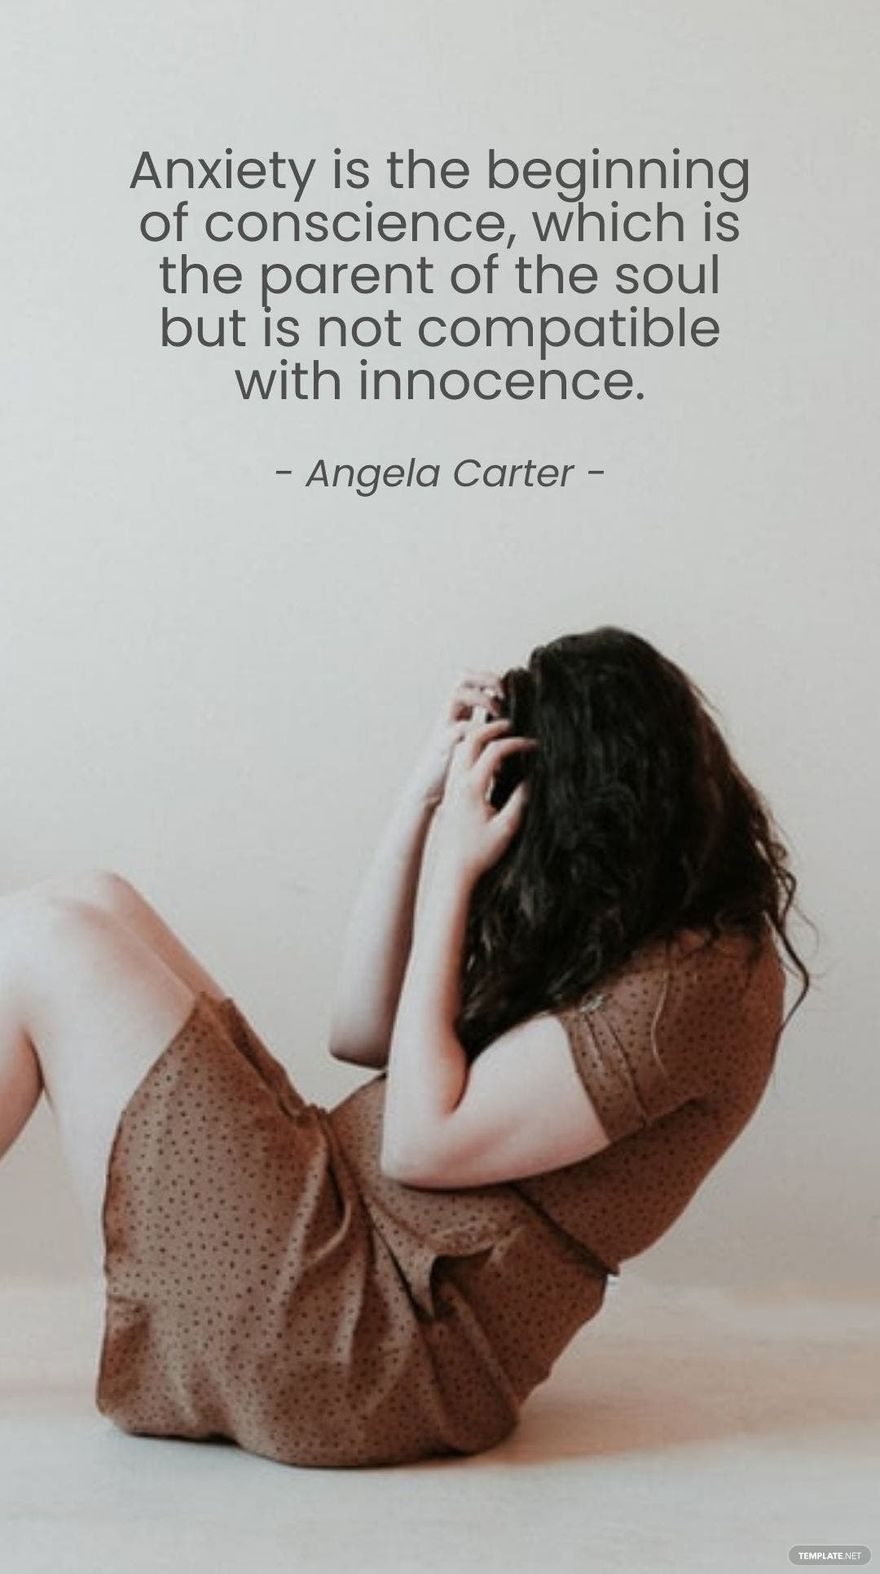 Angela Carter - Anxiety is the beginning of conscience, which is the parent of the soul but is not compatible with innocence. in JPG